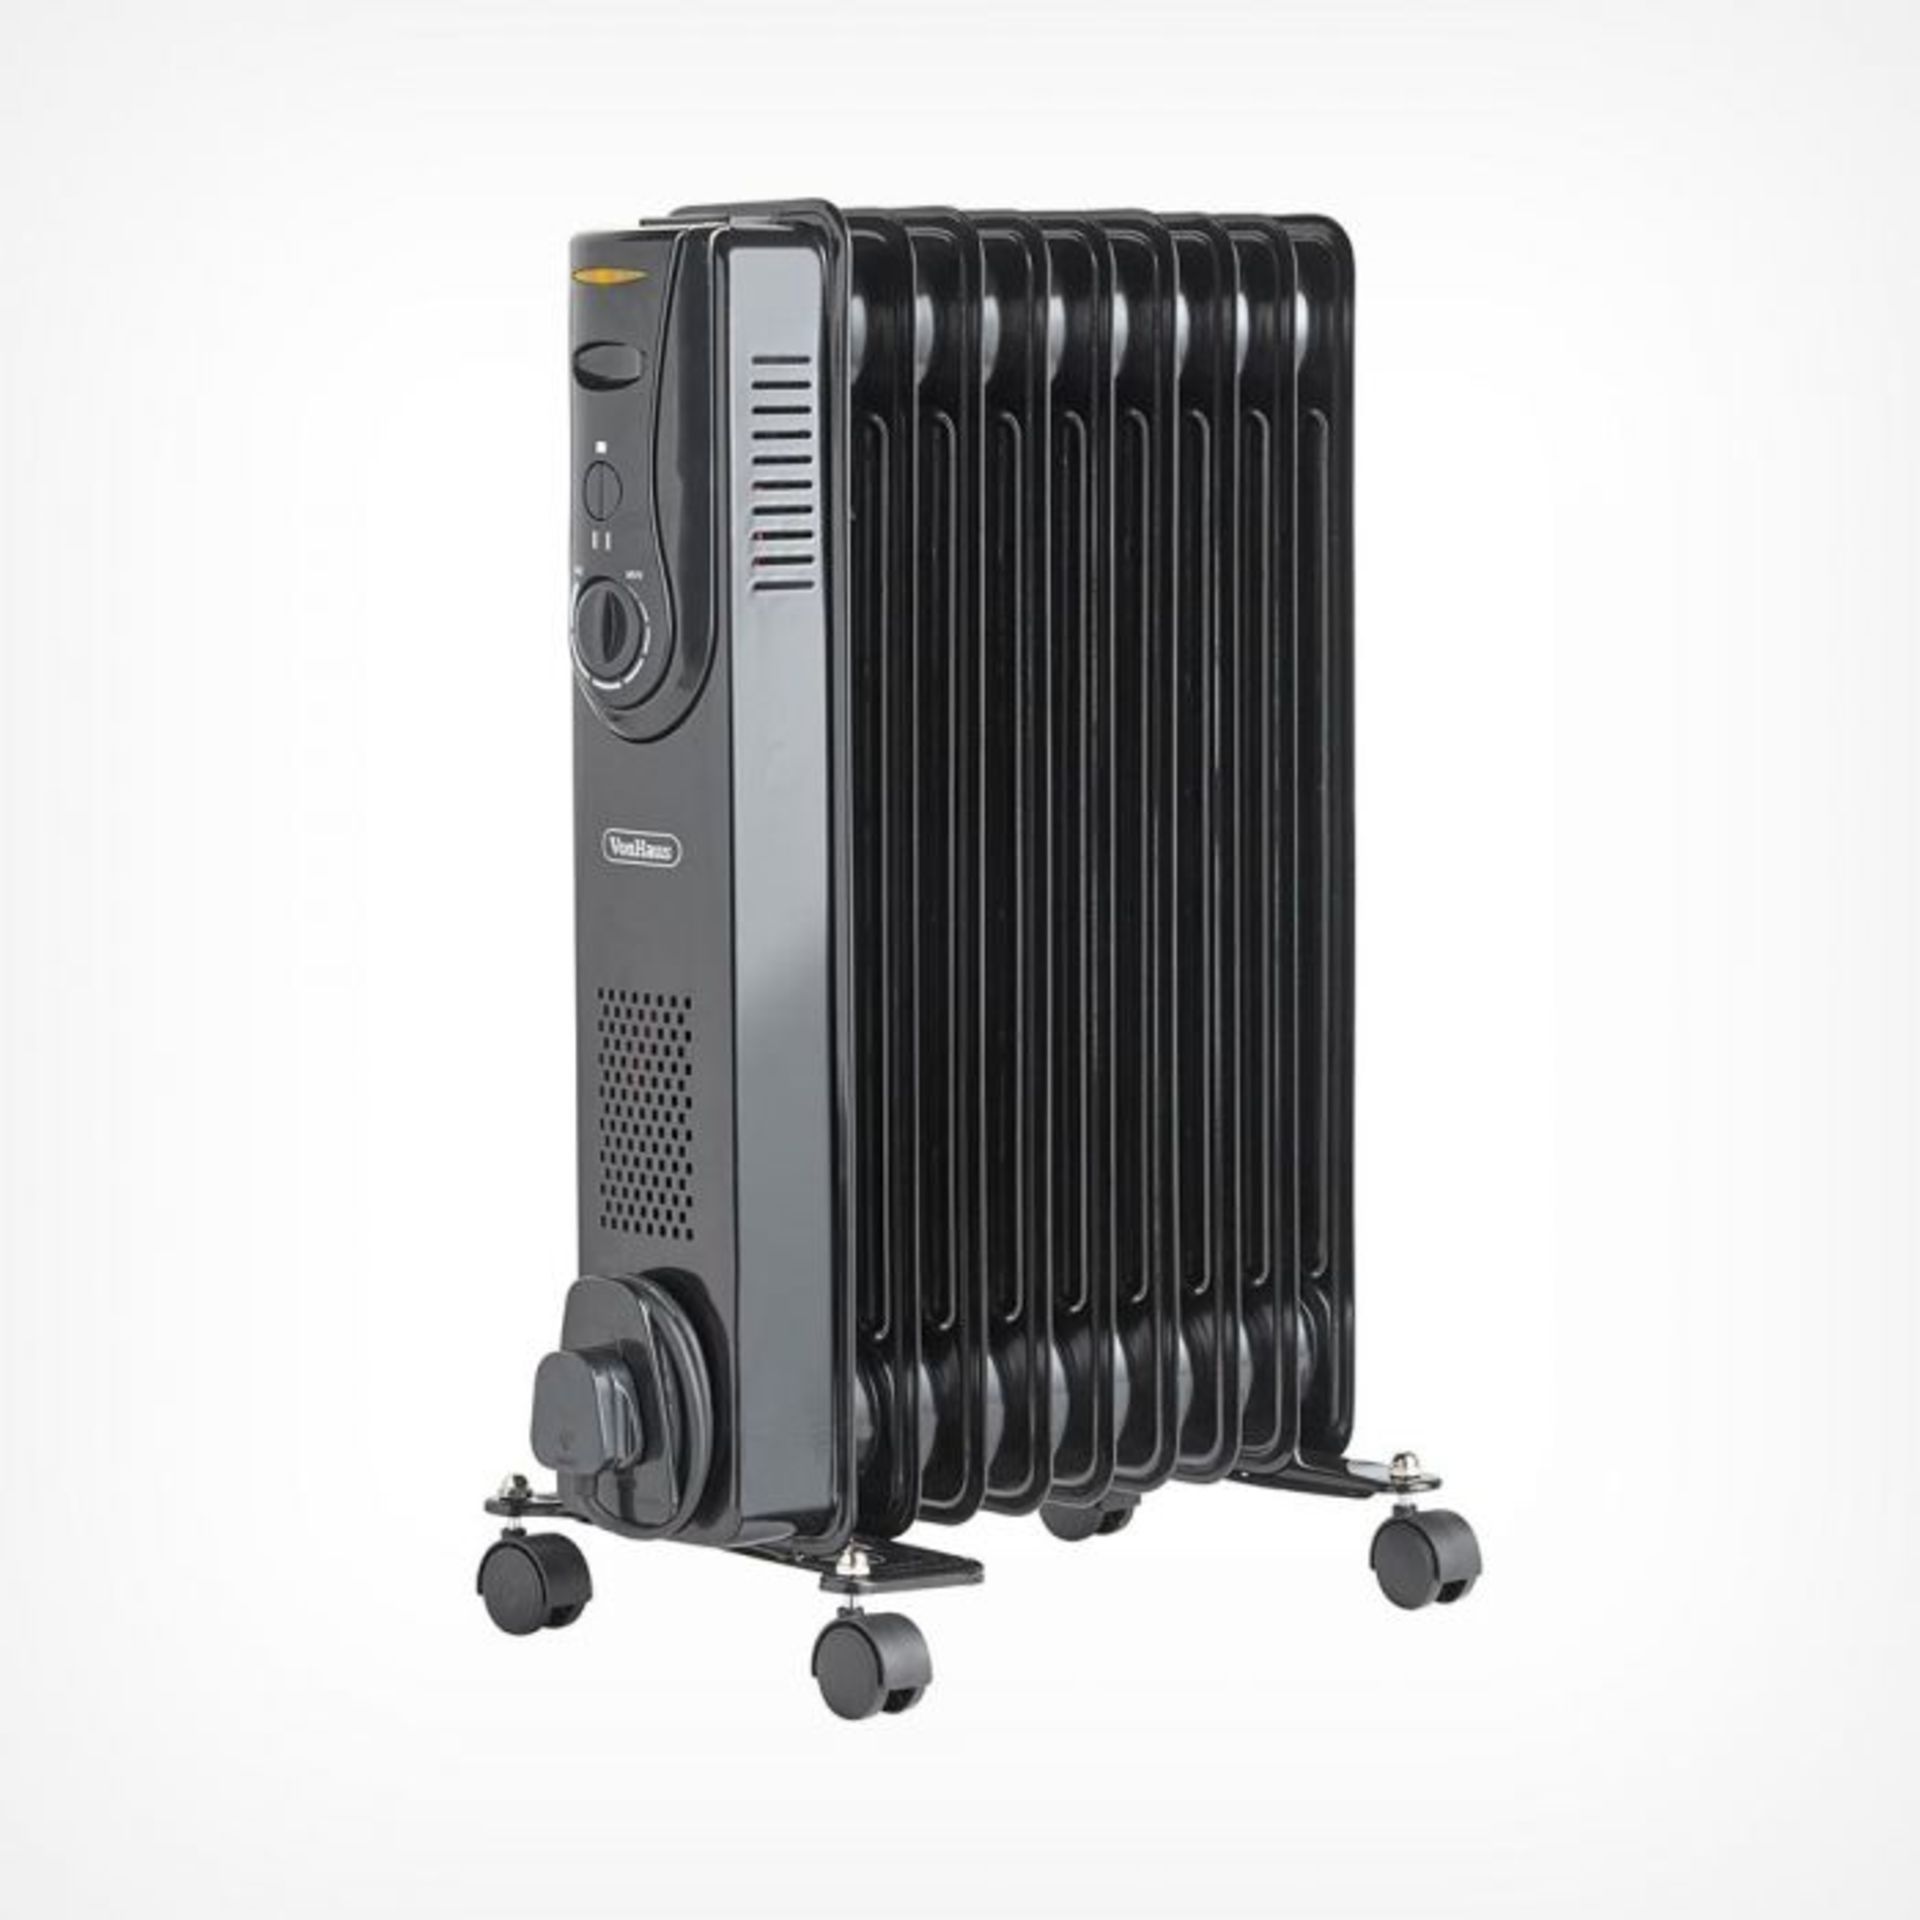 (V315) 9 Fin 2000W Oil Filled Radiator - Black Powerful 2000W radiator with 9 oil-filled fins ... - Image 2 of 4